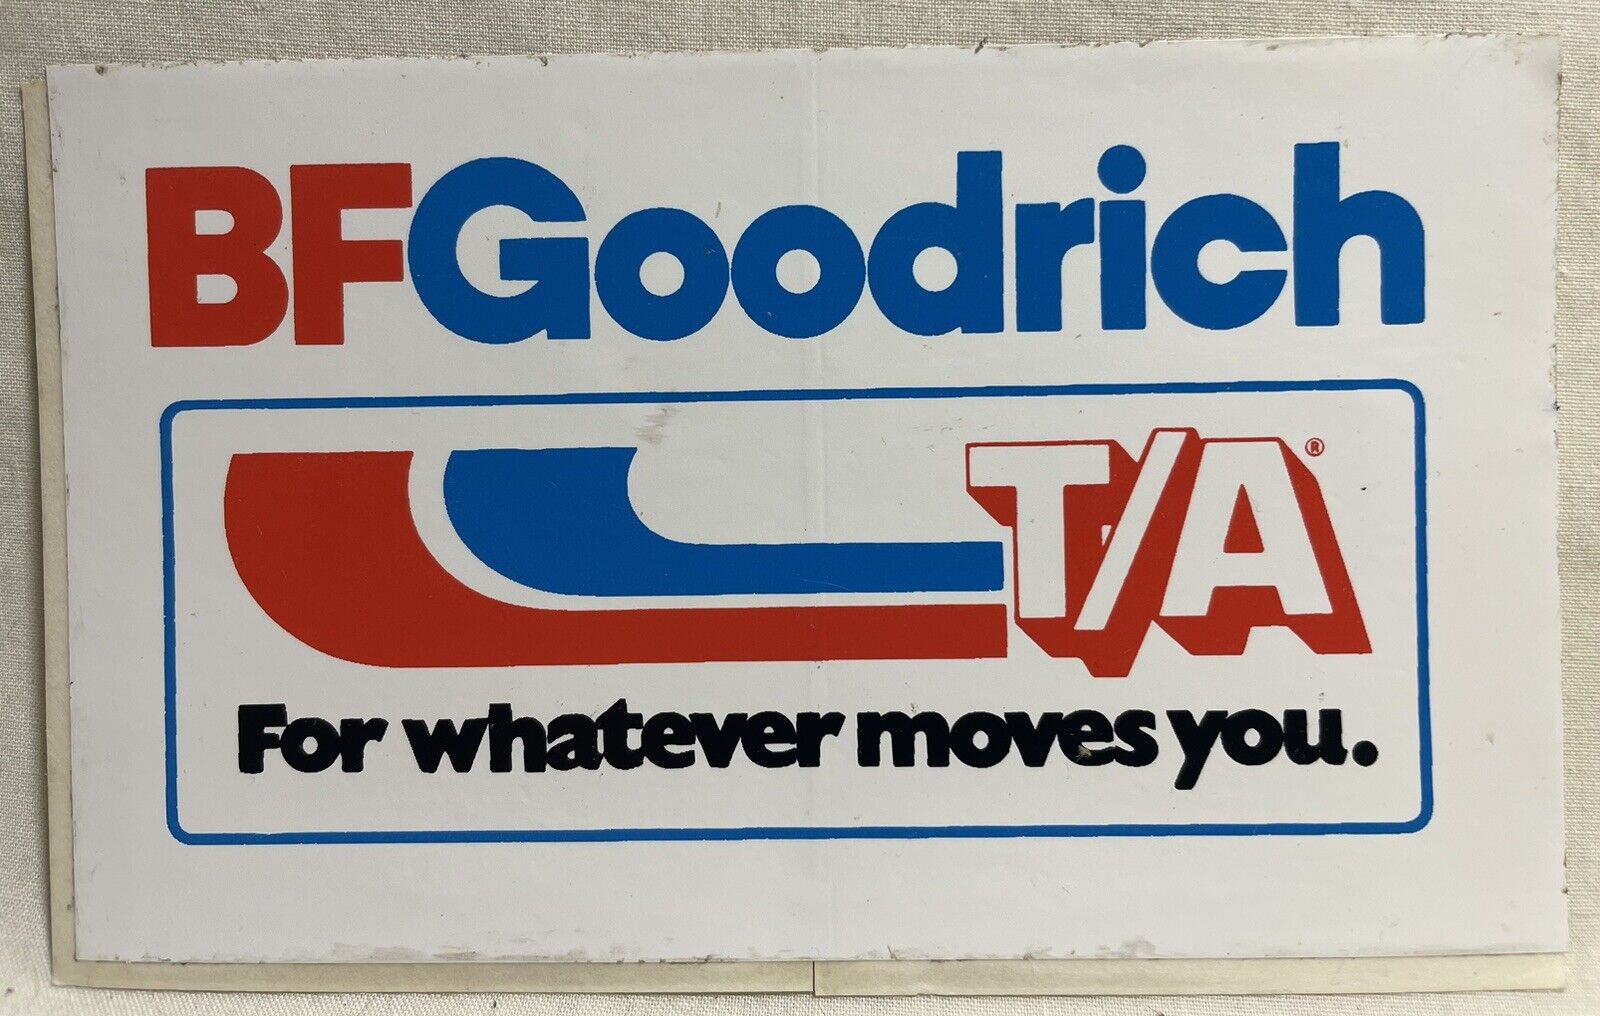 Vntg BF Goodrich T/A “For Whatever Moves You” Advert Radial Tires Original NEW B F Goodrich